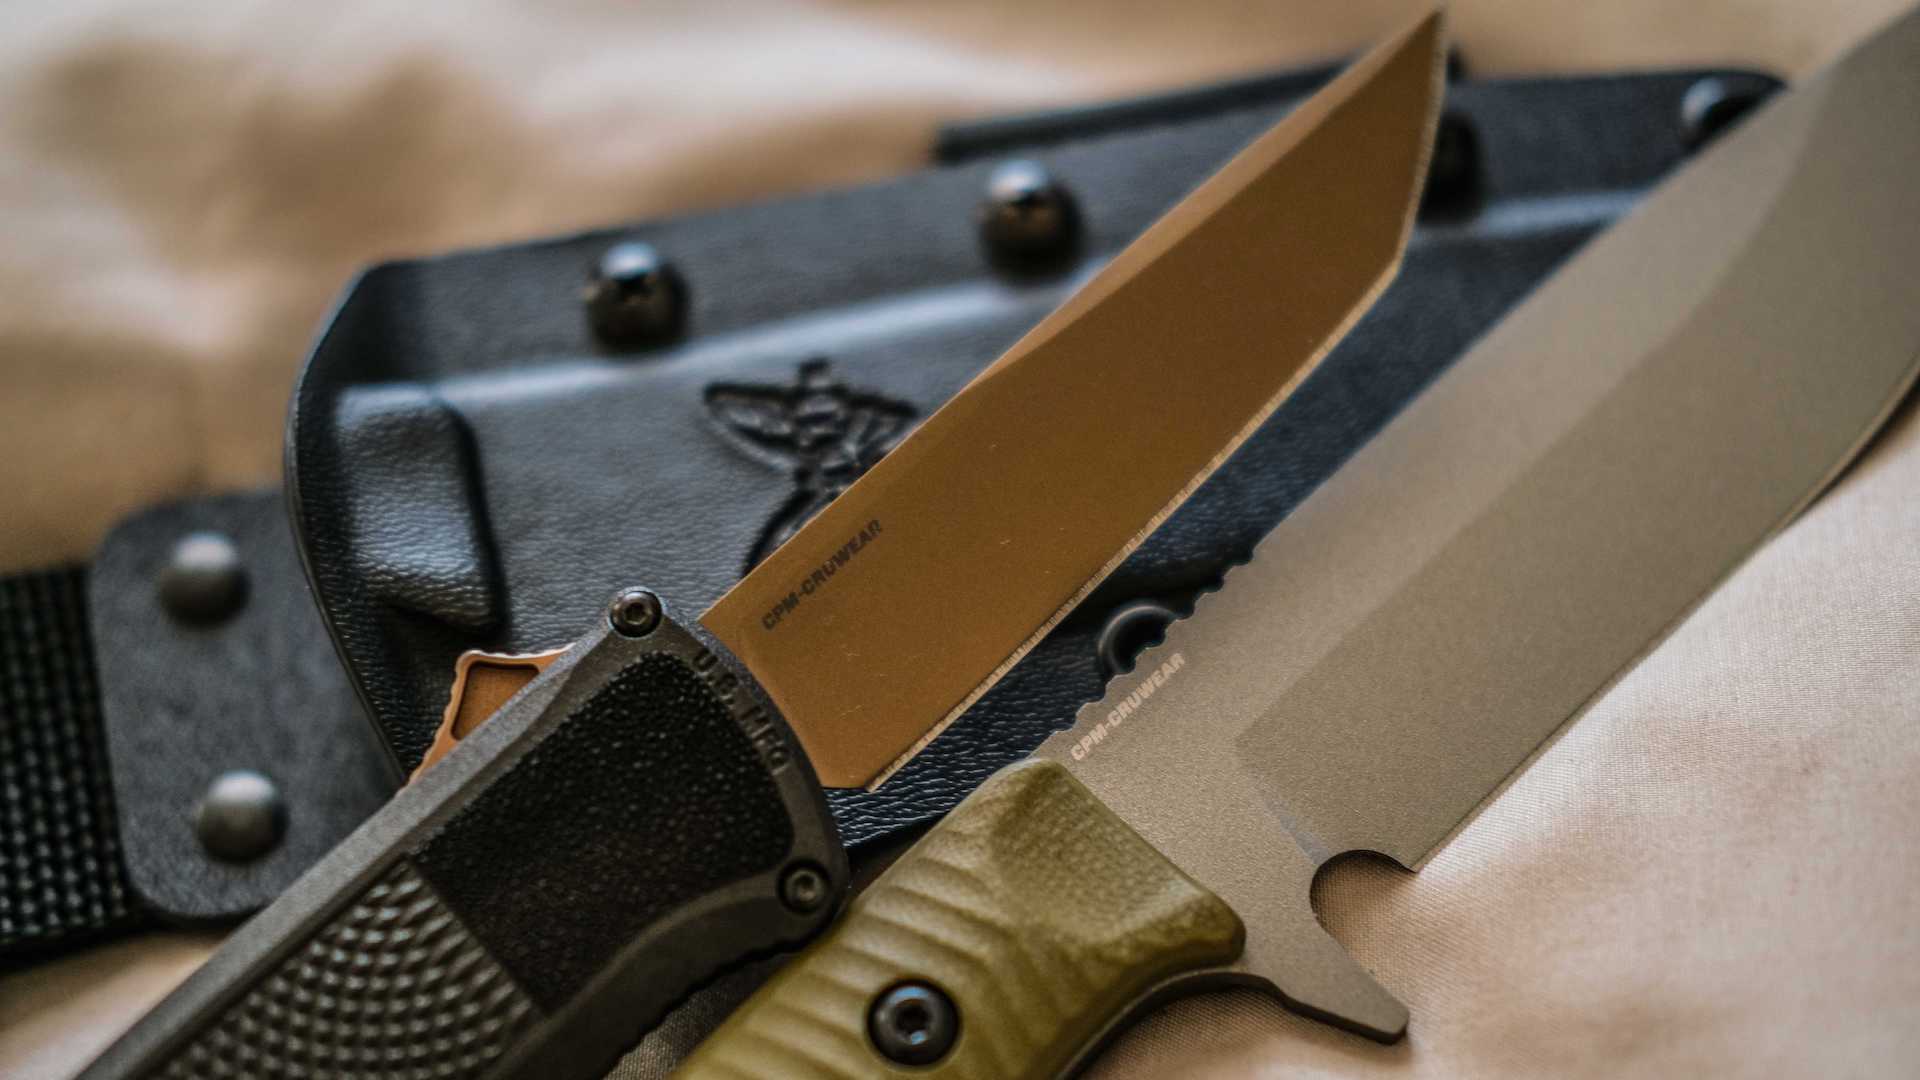 Benchmade Knife Company - When you buy Benchmade, you're buying